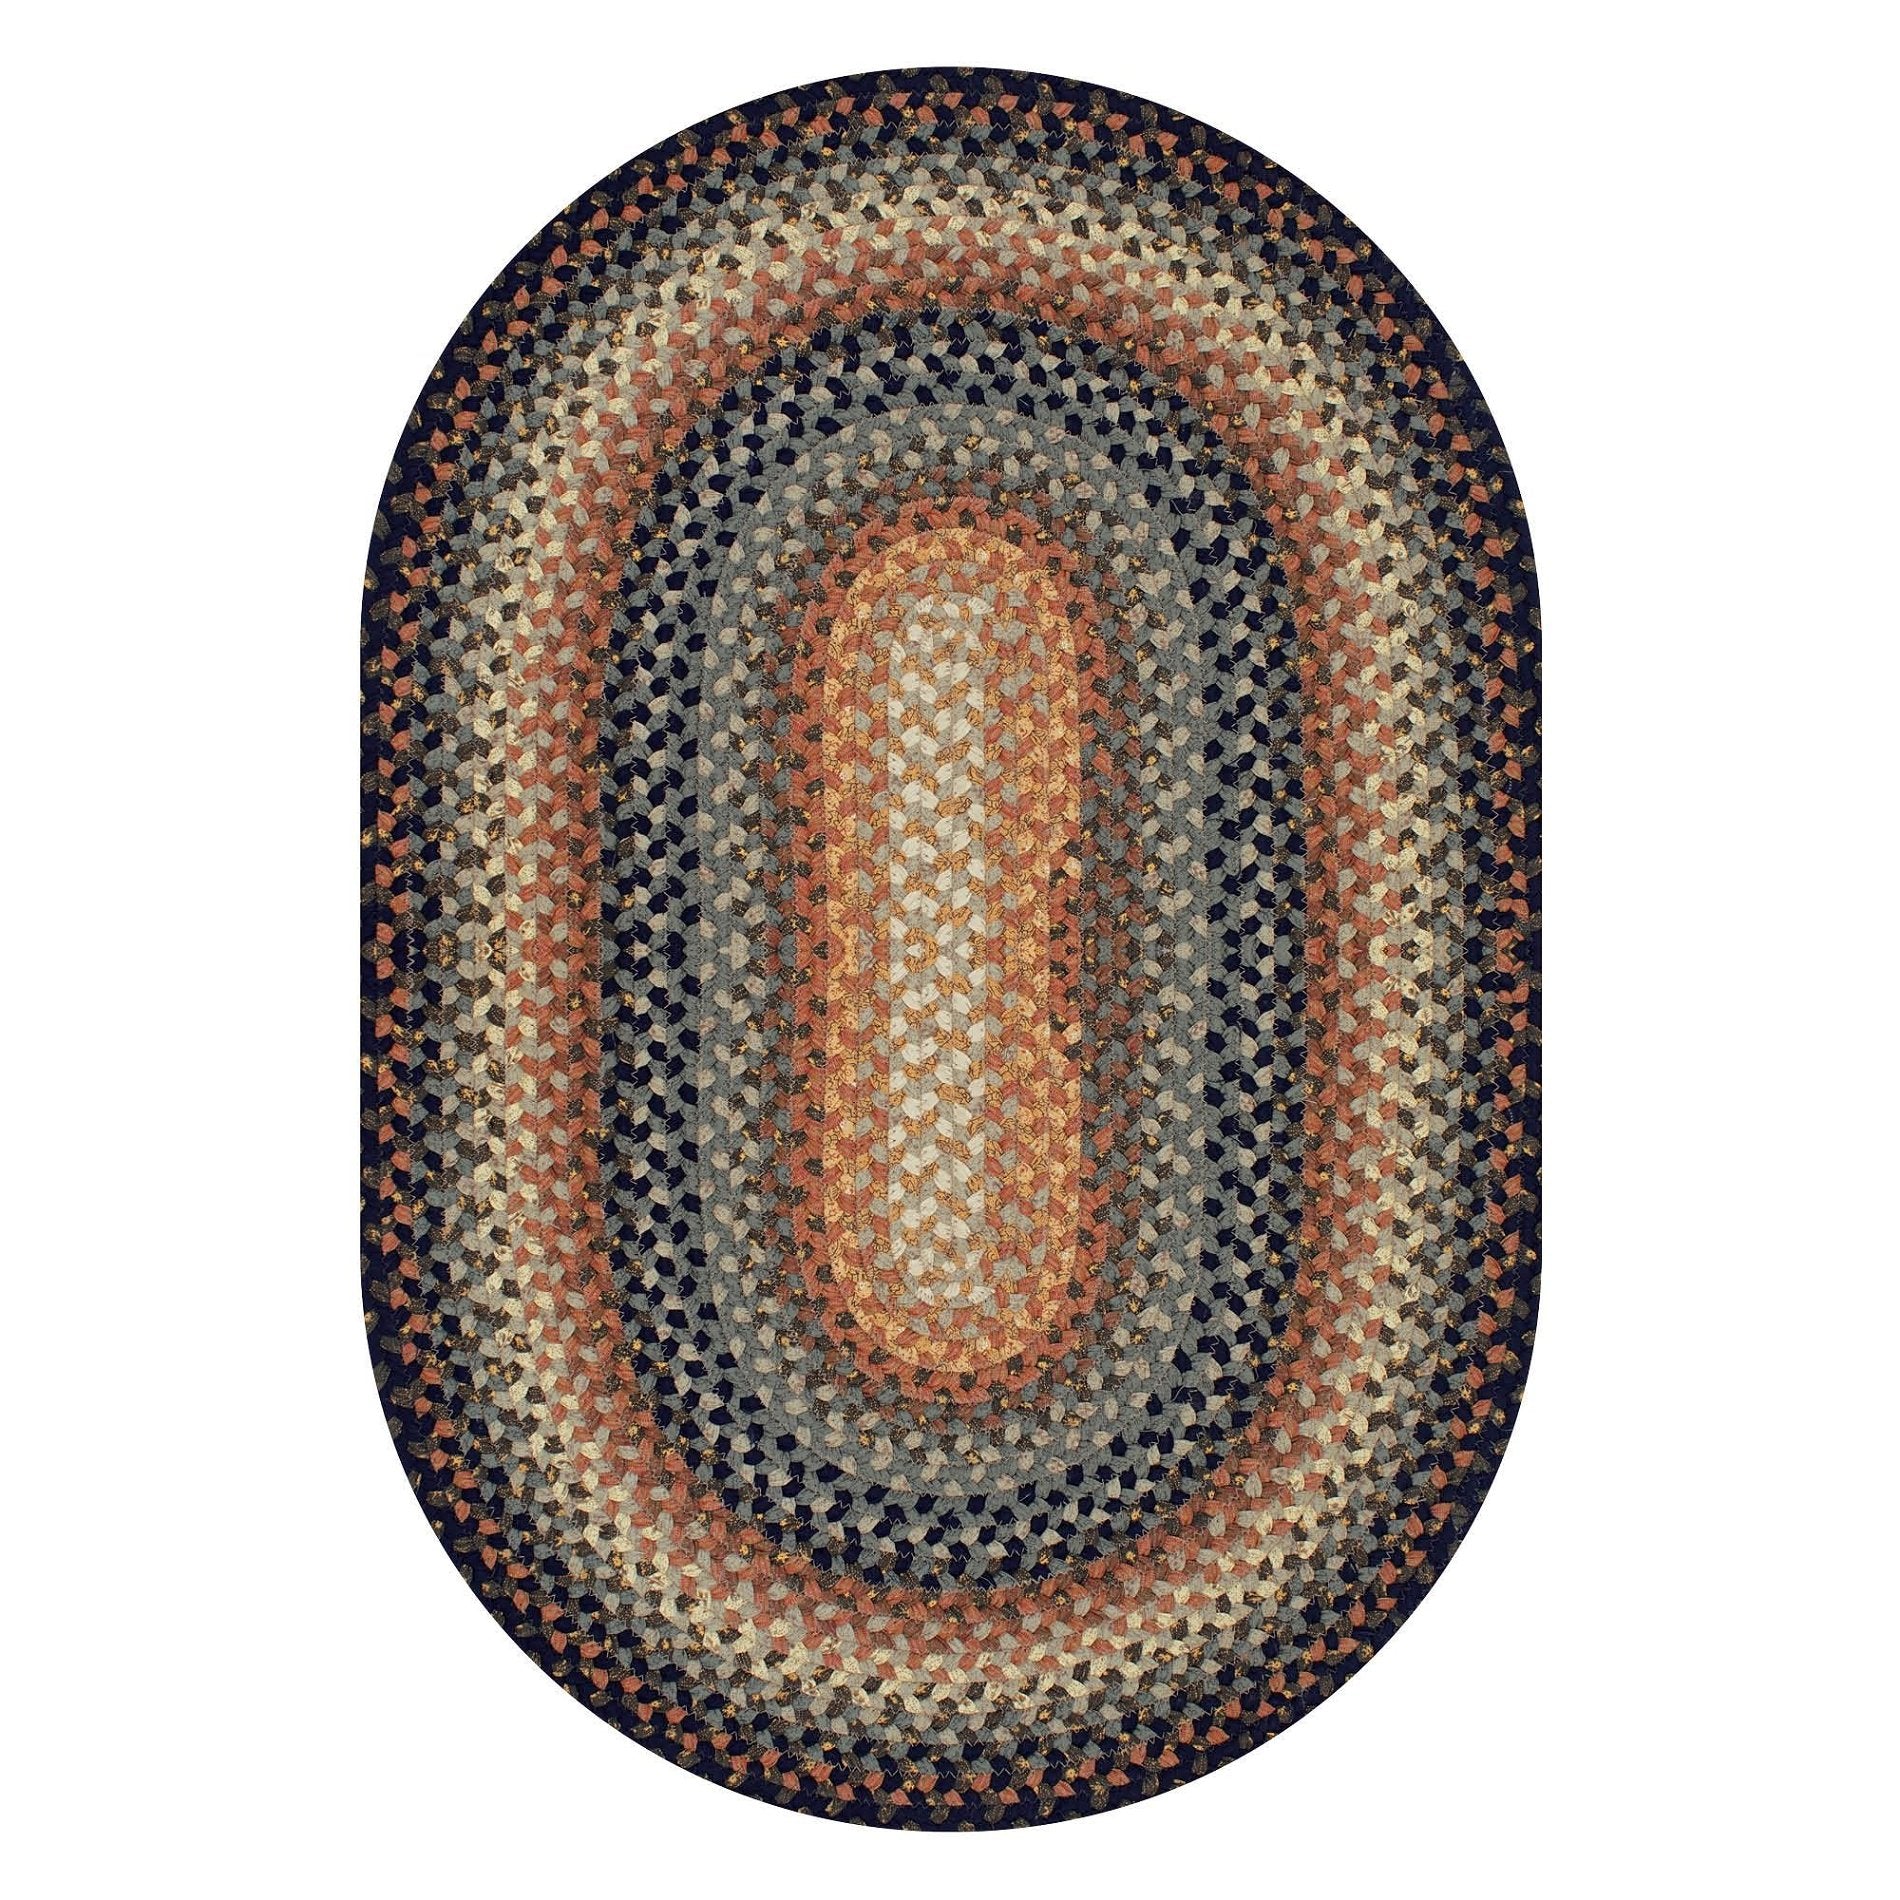 Cocoa Bean Brown and Black Cotton Braided Oval Rugs - Braided-Rugs.com